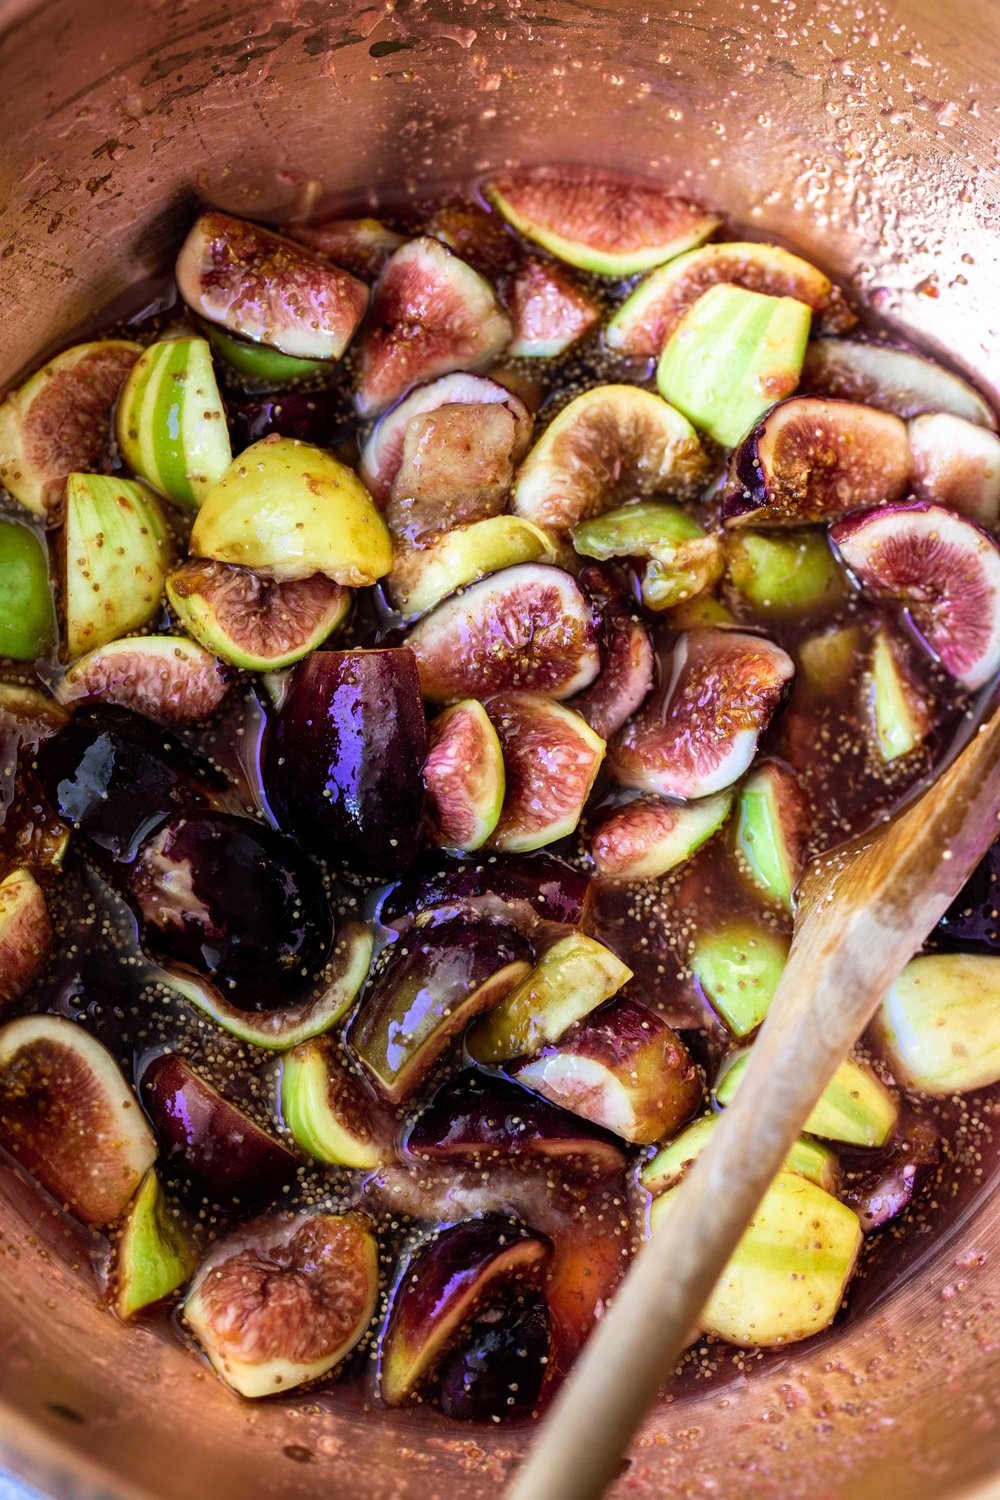 macerated figs in copper bowl with wooden spoon